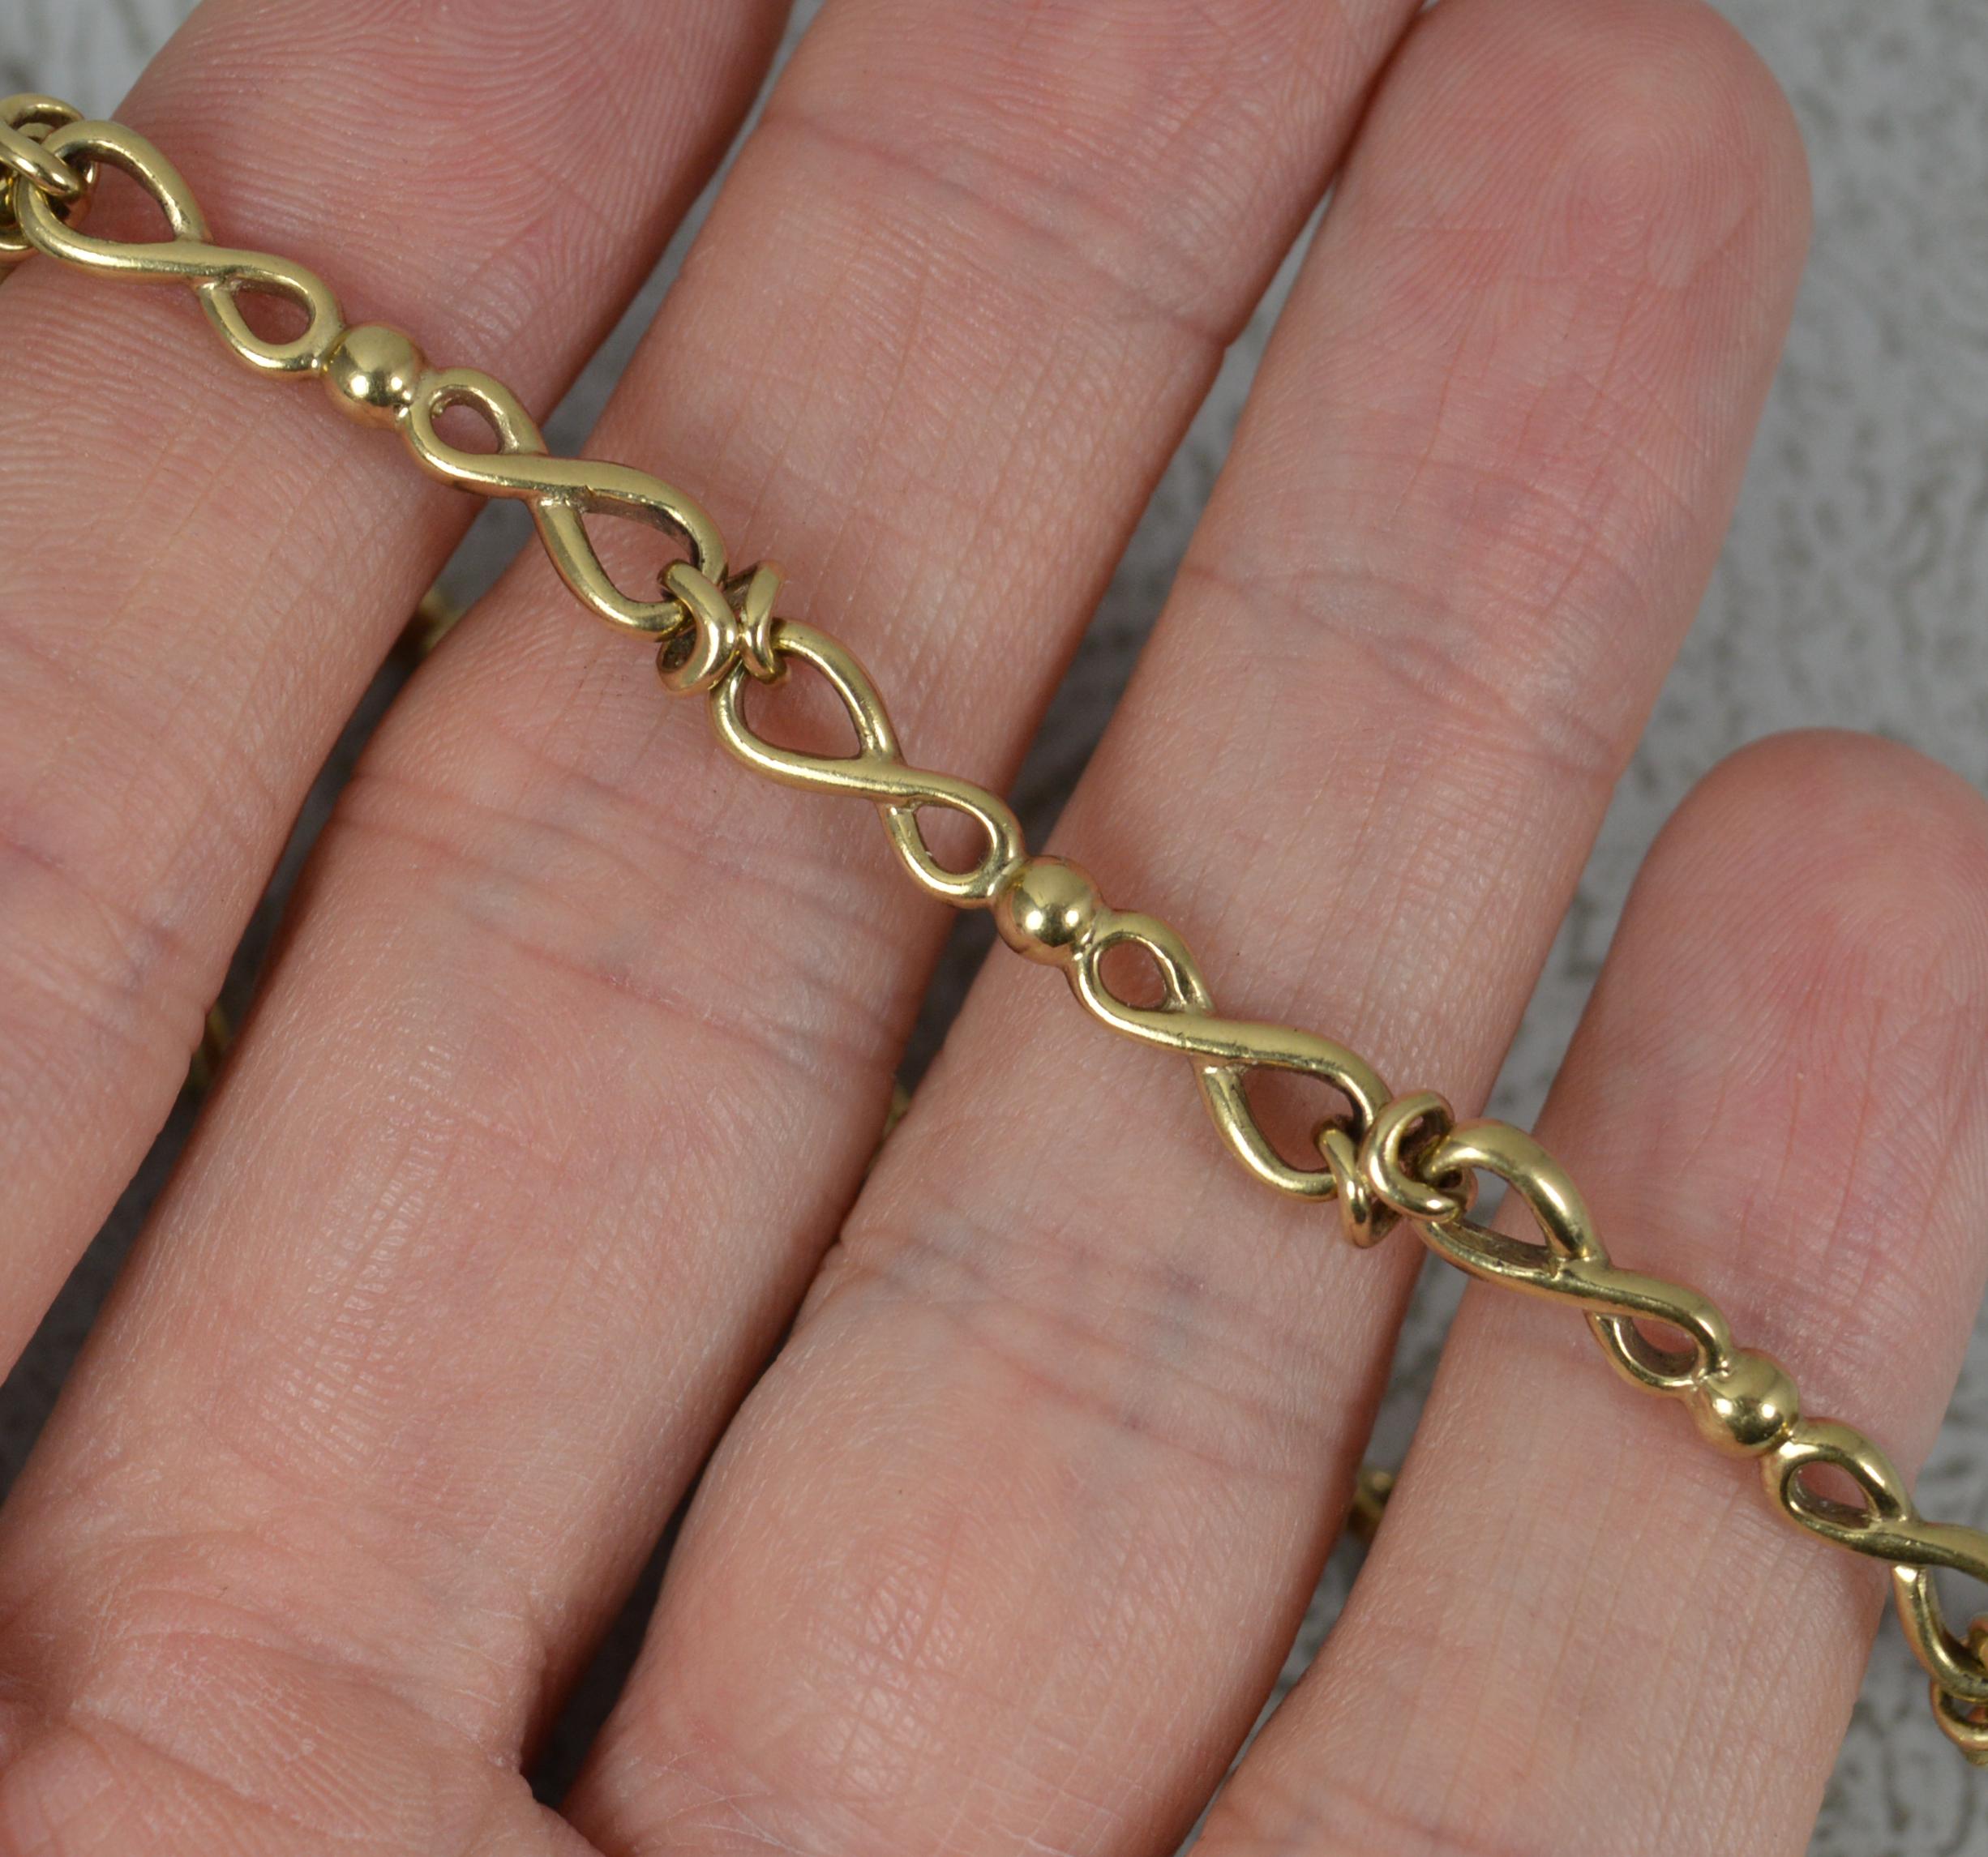 A very stylish chain.
Solid 9 carat yellow gold.
Kiss link design.

CONDITION ; Very good. Crisp design. Working clasp. Issue free. Please view photographs.
WEIGHT ; 21.6 grams
SIZE ; 5.2mm wide links, 17 inch chain
HALLMARKS ; full marks to end link